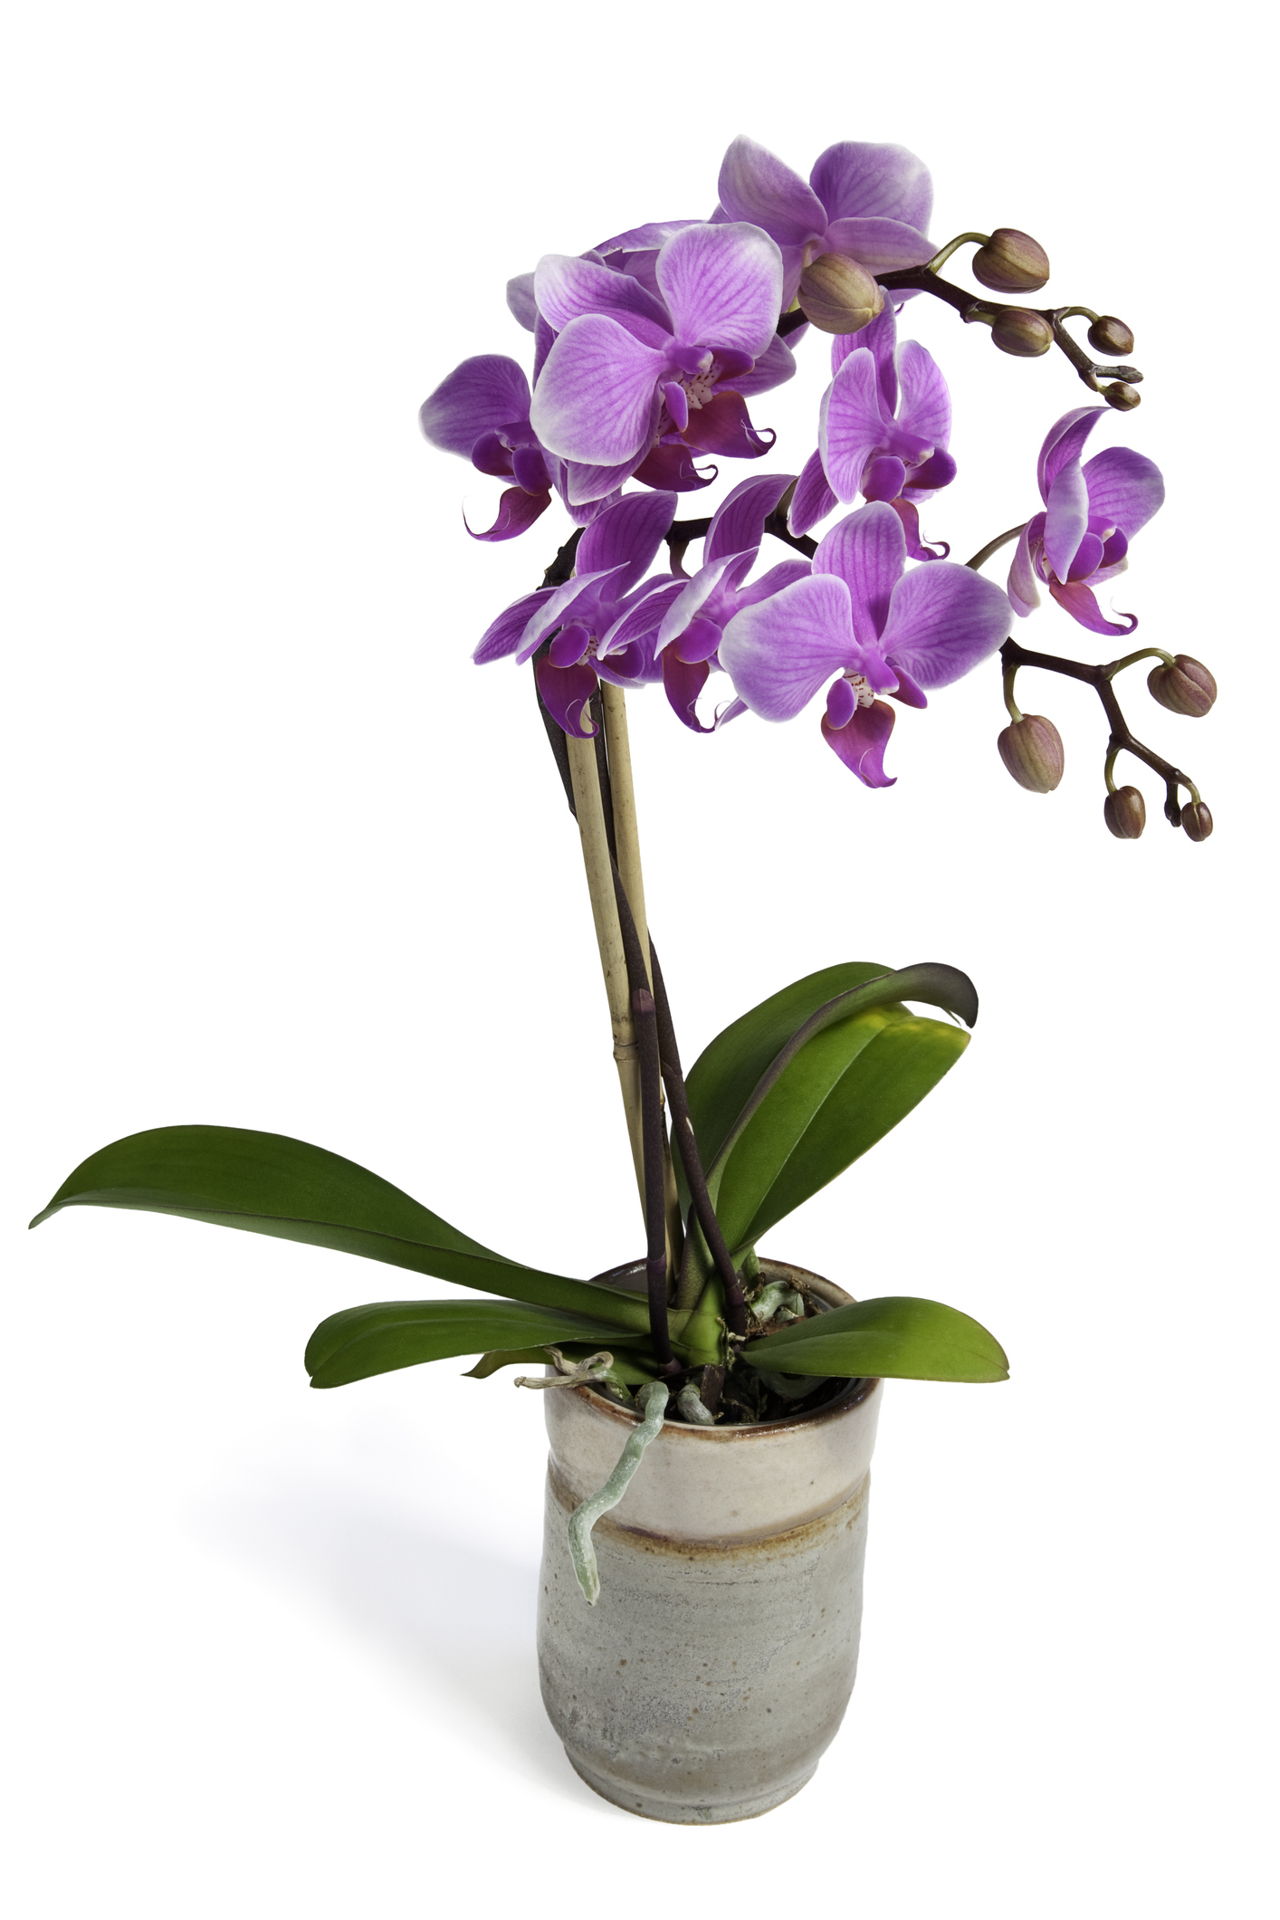 Think You Know How to Take Care of Ground Orchids? Read This